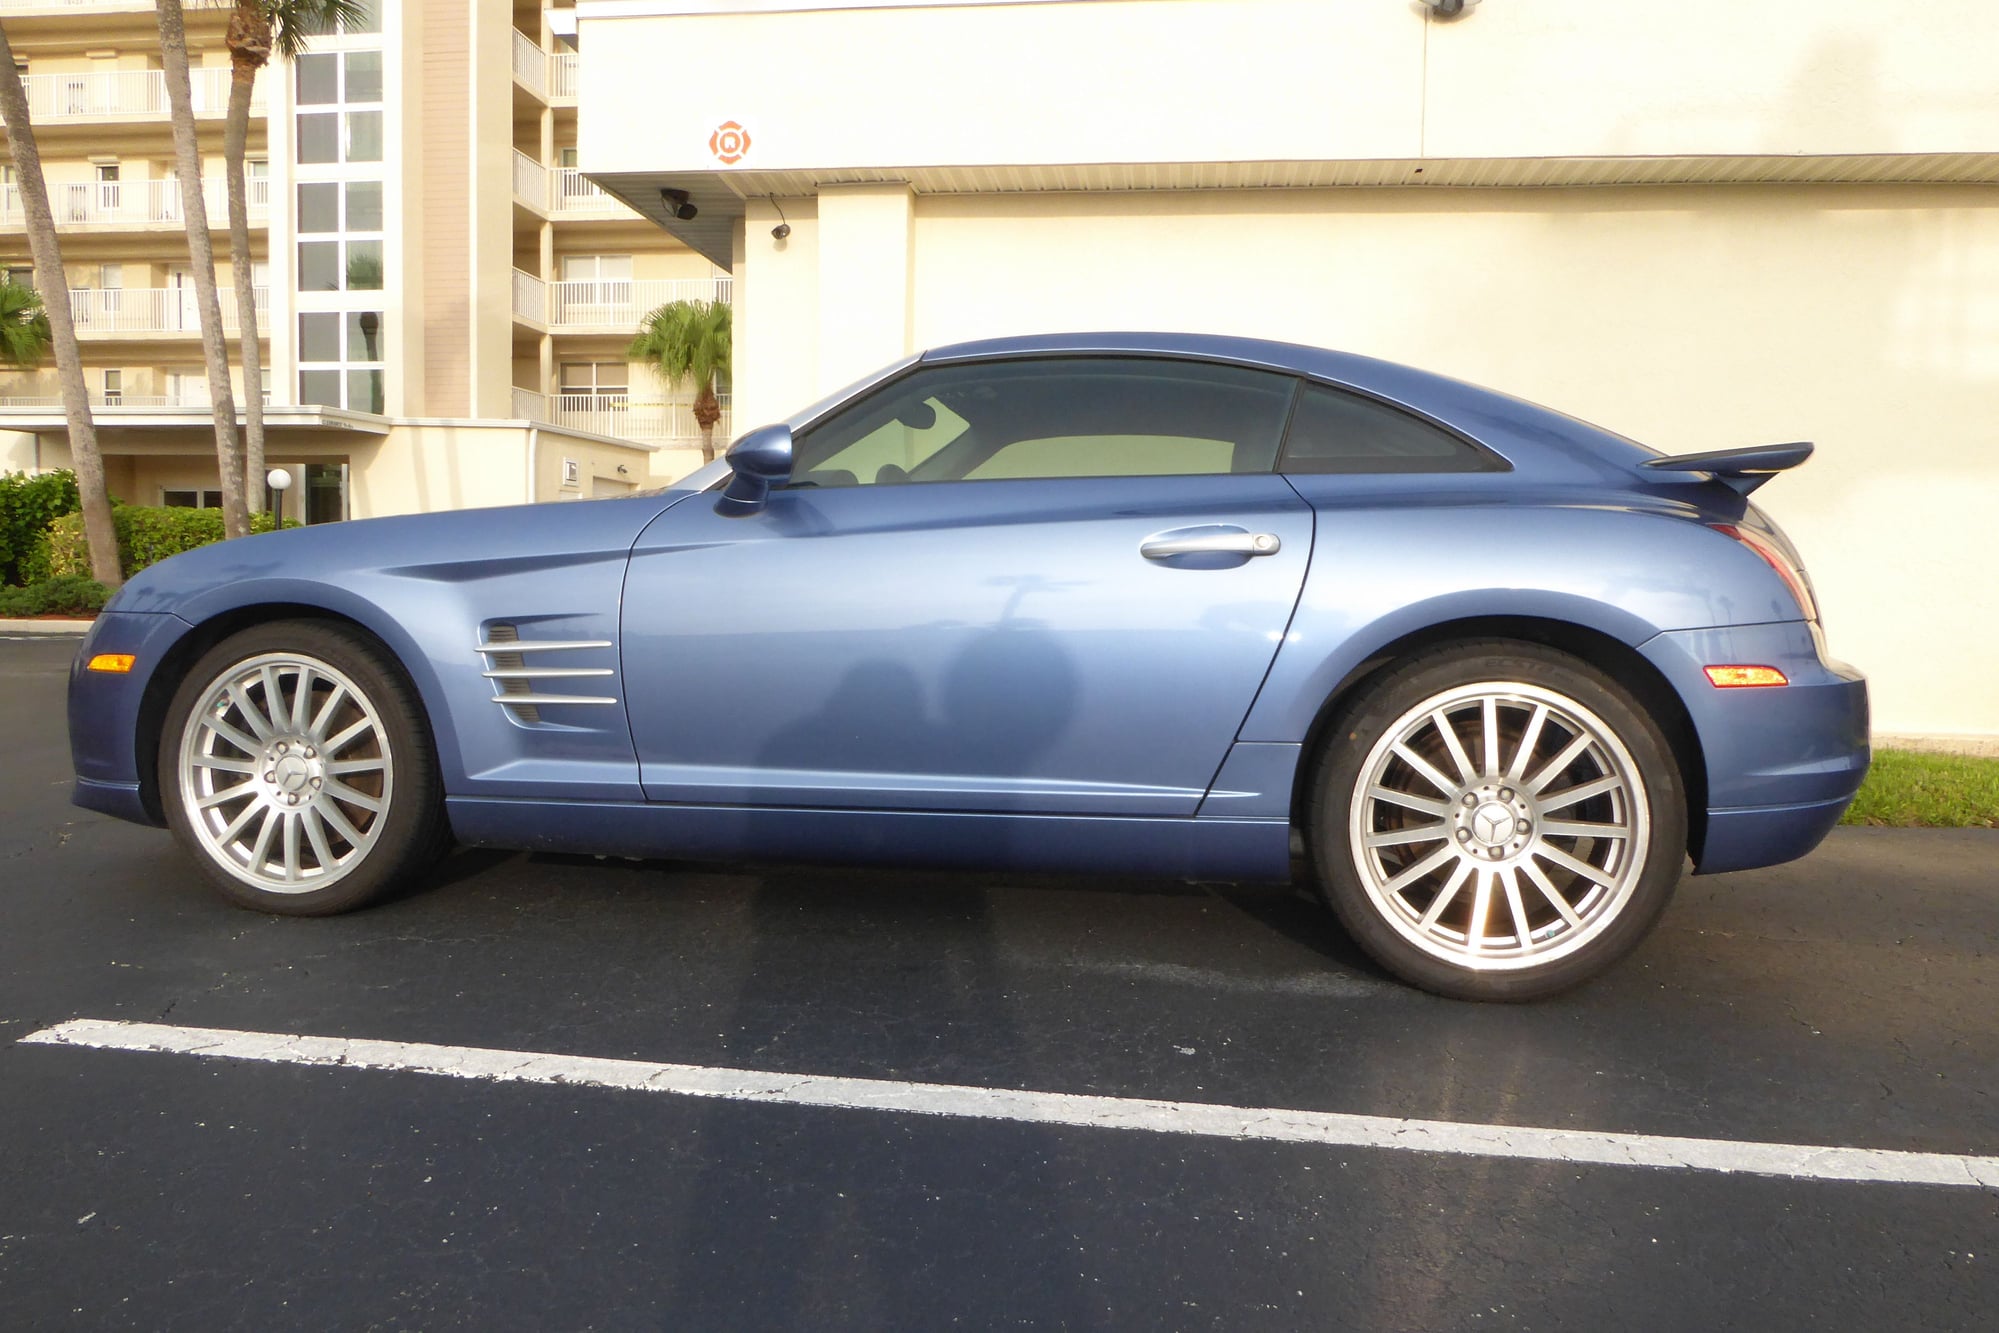 2005 Chrysler Crossfire - srt 6 Florida/ California car, great shape come get it drive it home... - Used - VIN 1C3AN79N65X050305 - 125,600 Miles - 6 cyl - 2WD - Automatic - Coupe - Blue - Indialantic, FL 32903, United States